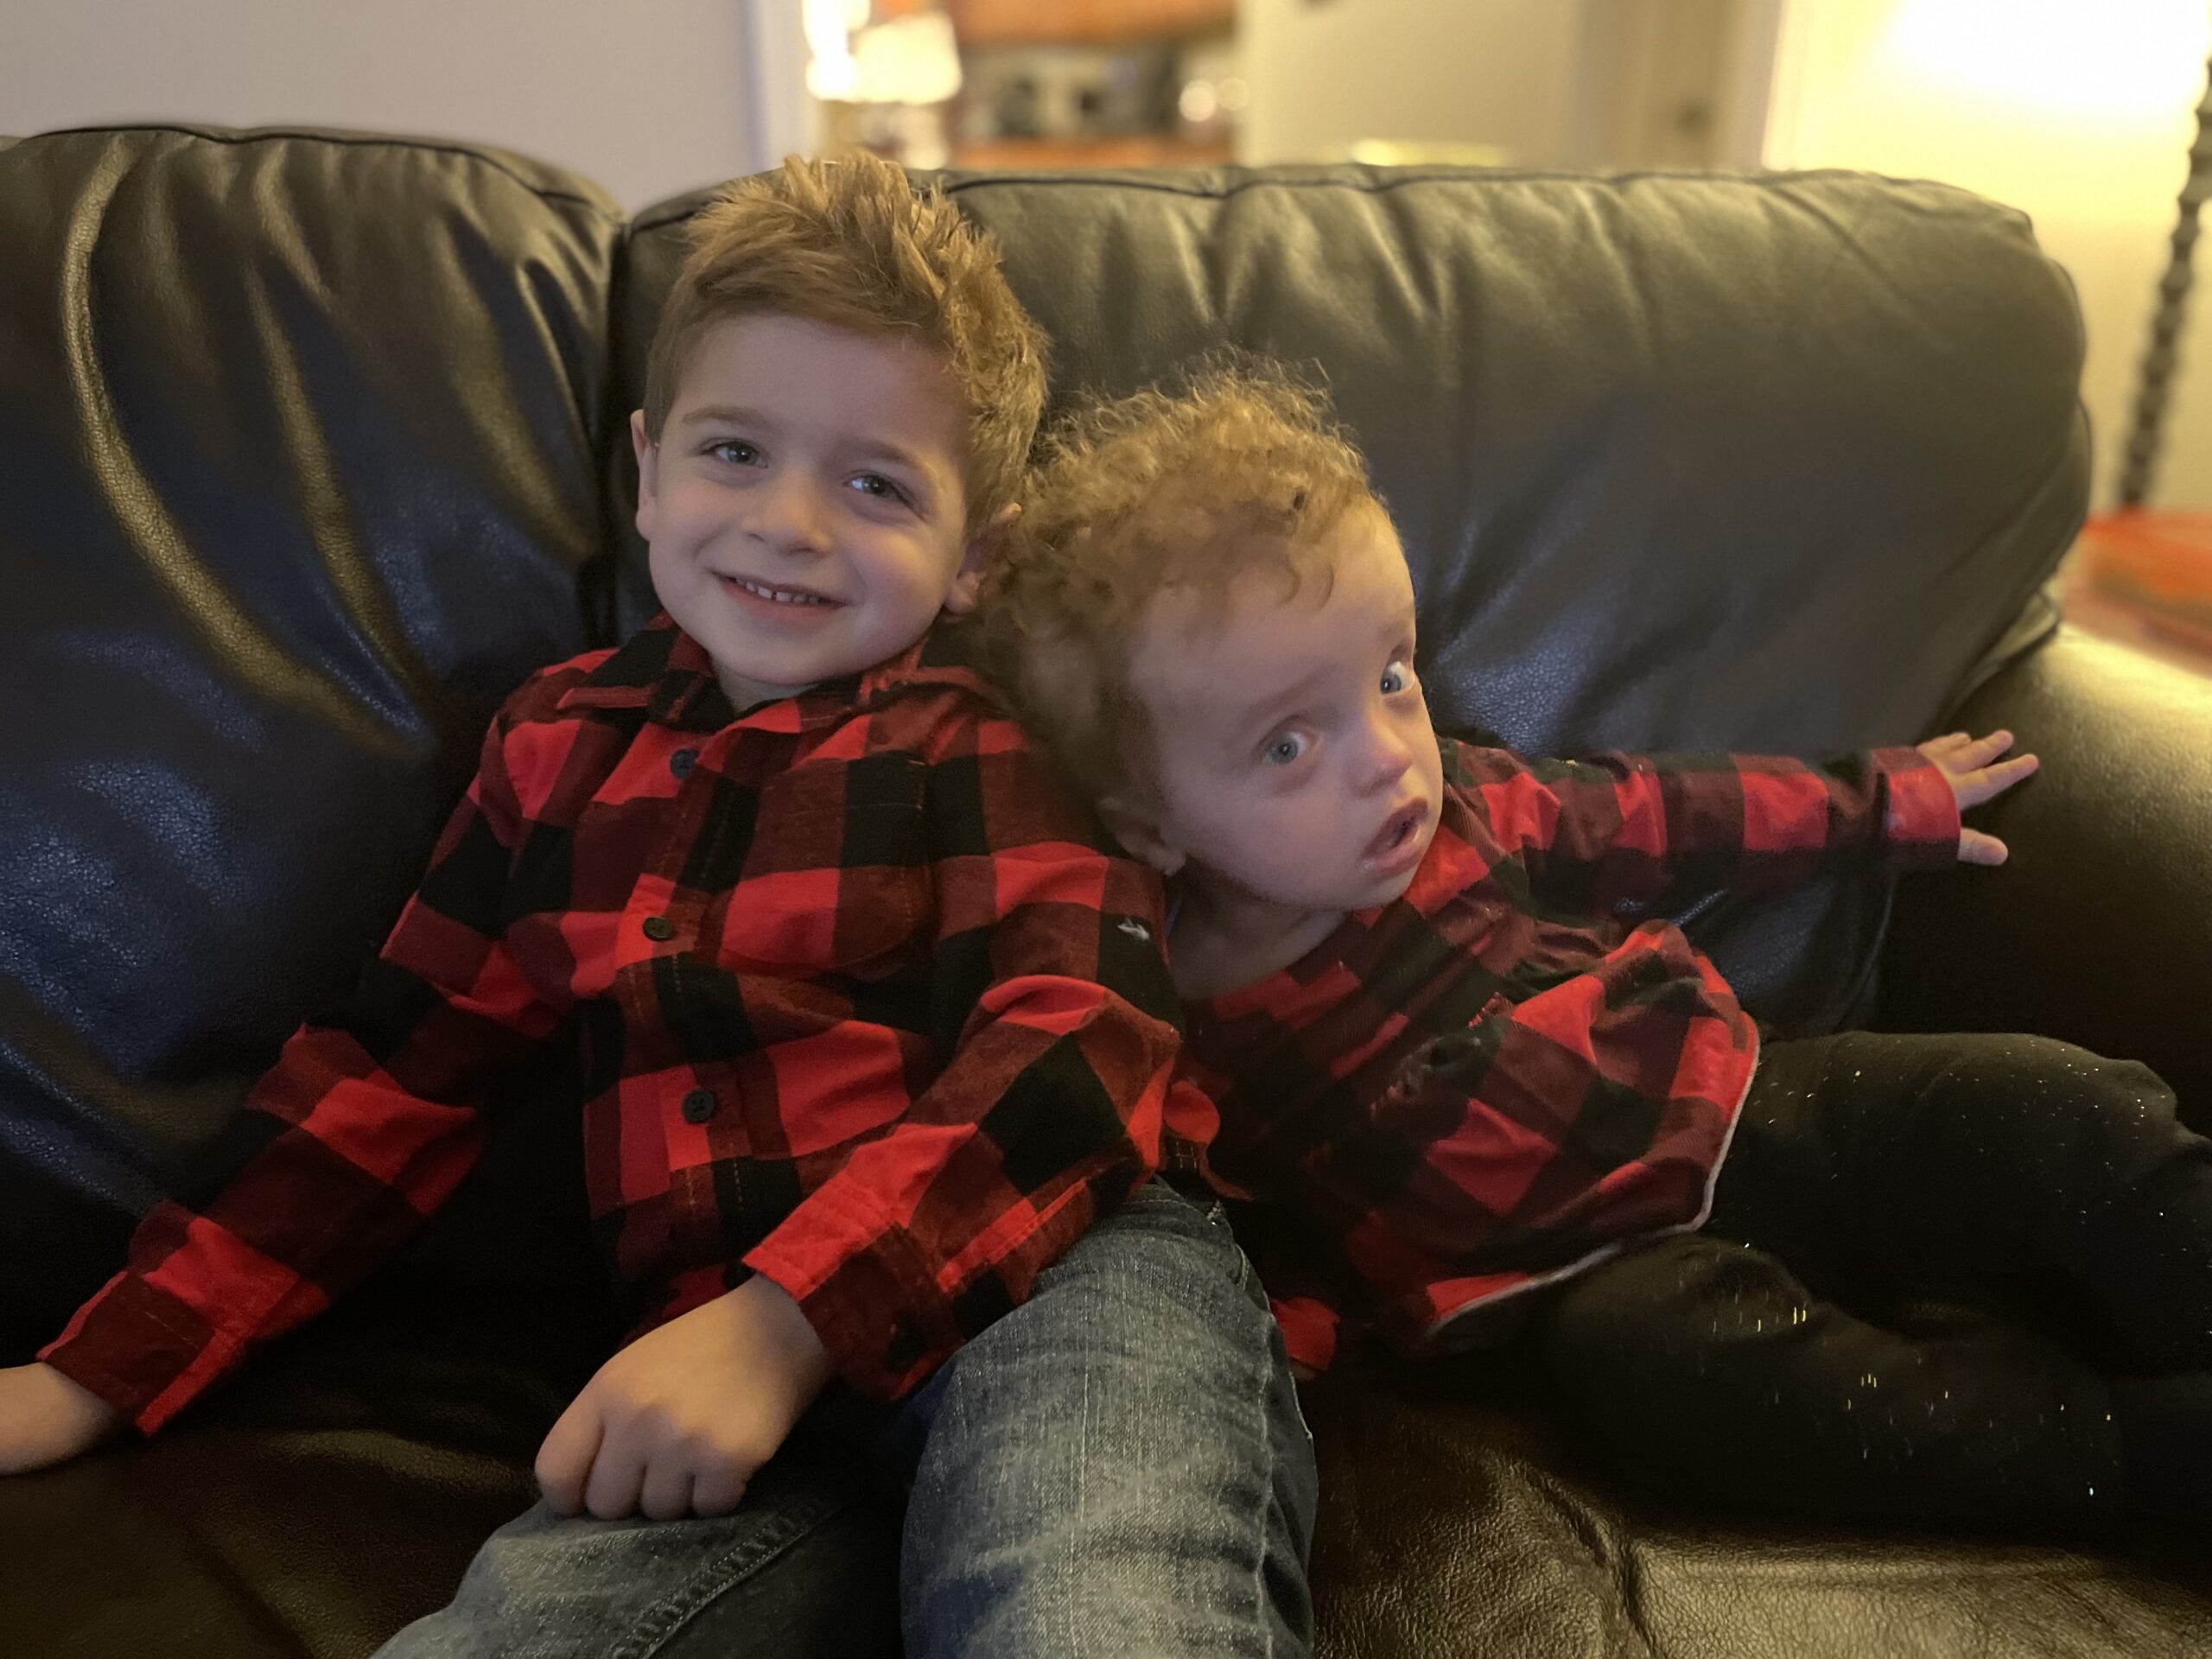 Noah and Hailey in matching flannel red and black long sleeve shirts